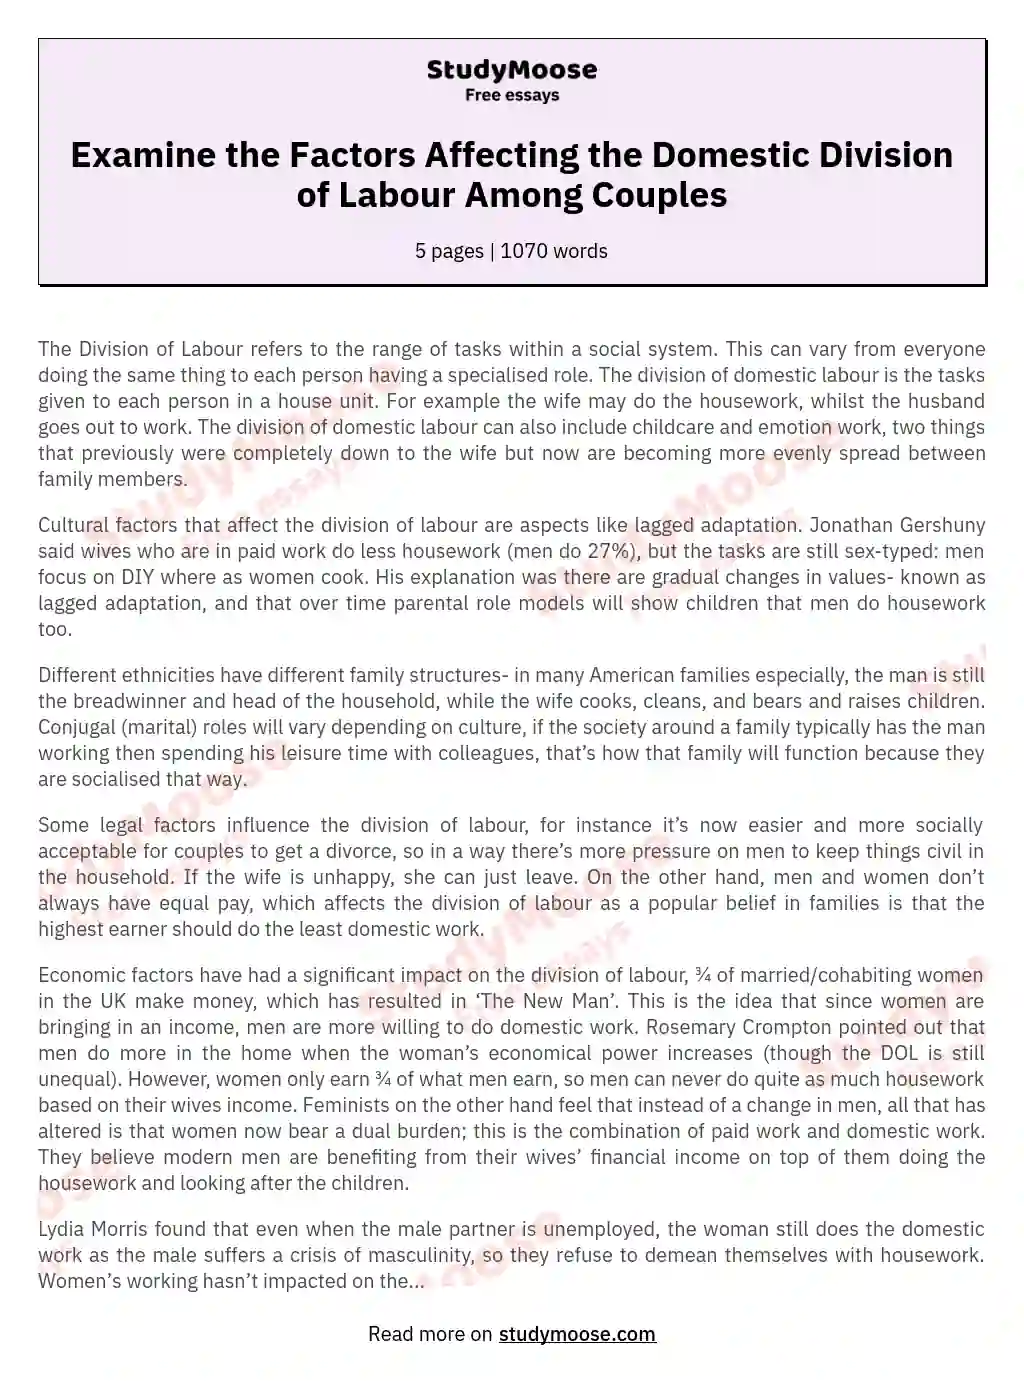 Examine the Factors Affecting the Domestic Division of Labour Among Couples